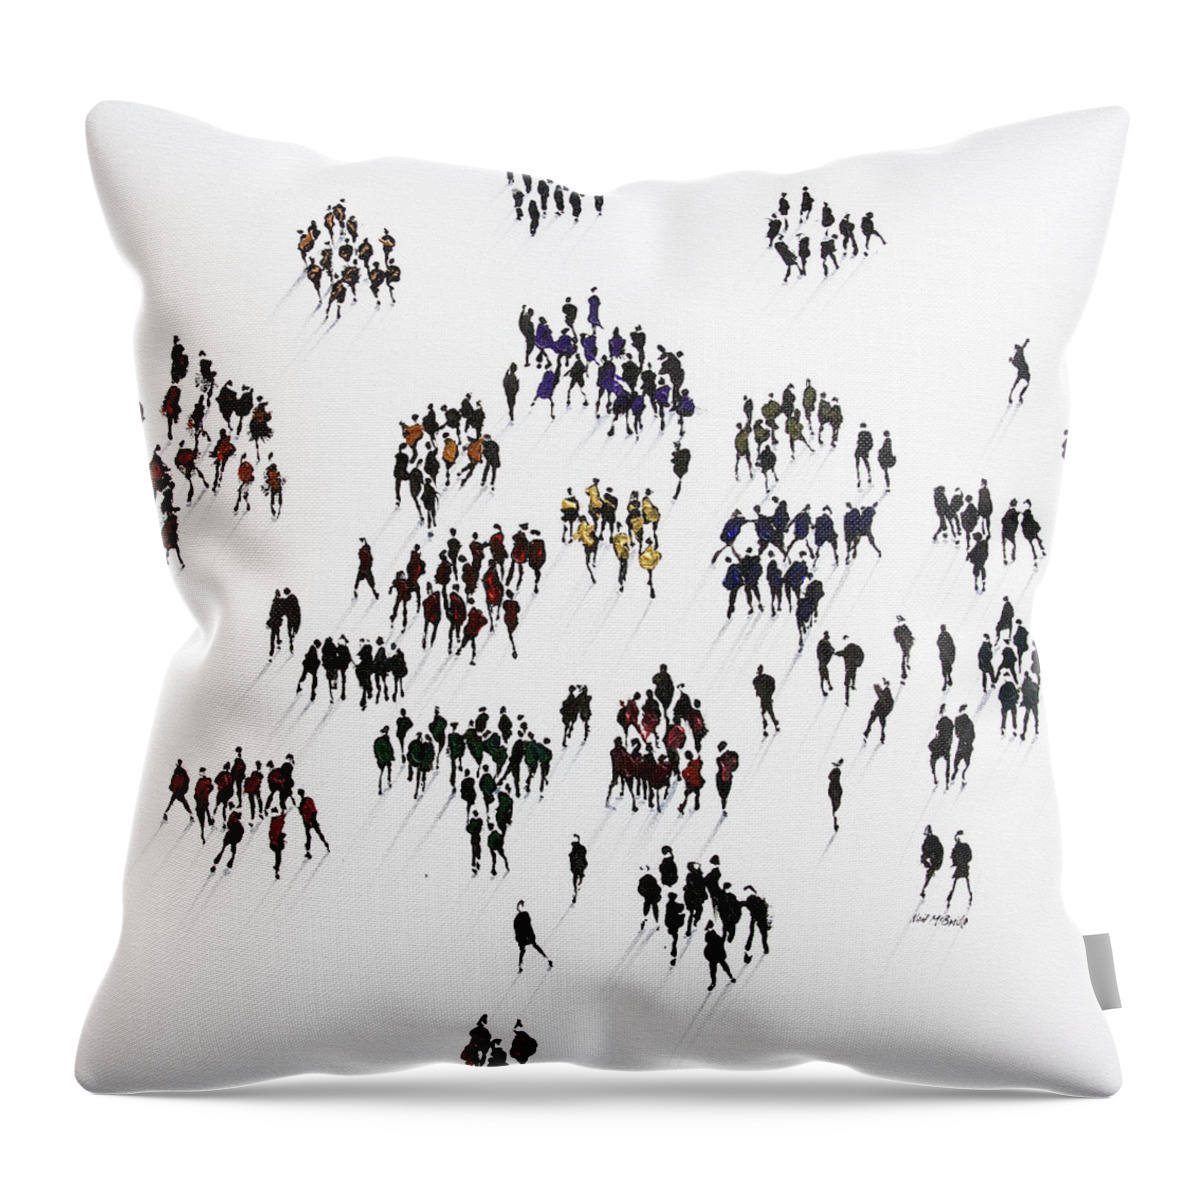 Cliques Throw Pillow featuring the painting Cliques by Neil McBride